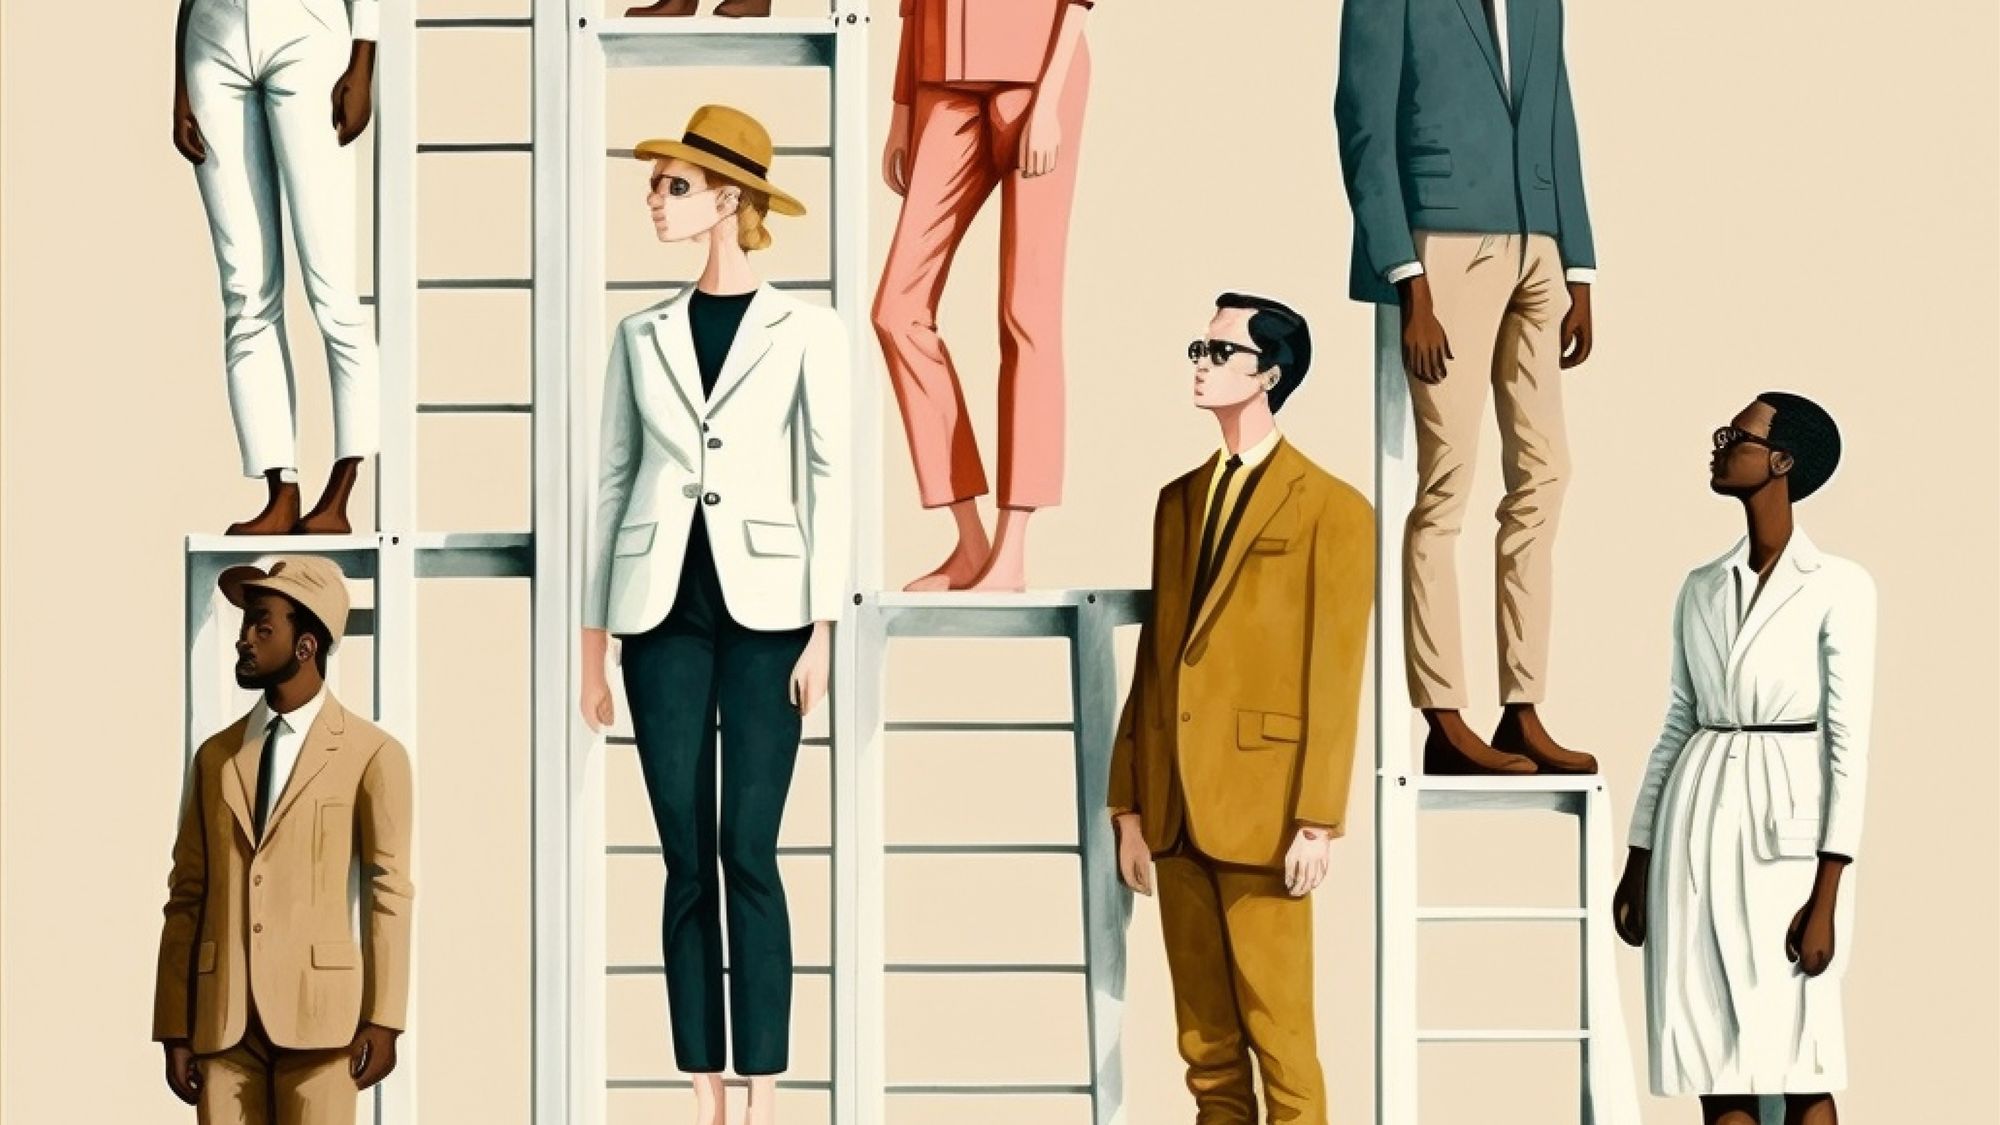 An Image of a diverse group of people climbing a career ladderAn Image of a diverse group of people climbing a career ladder